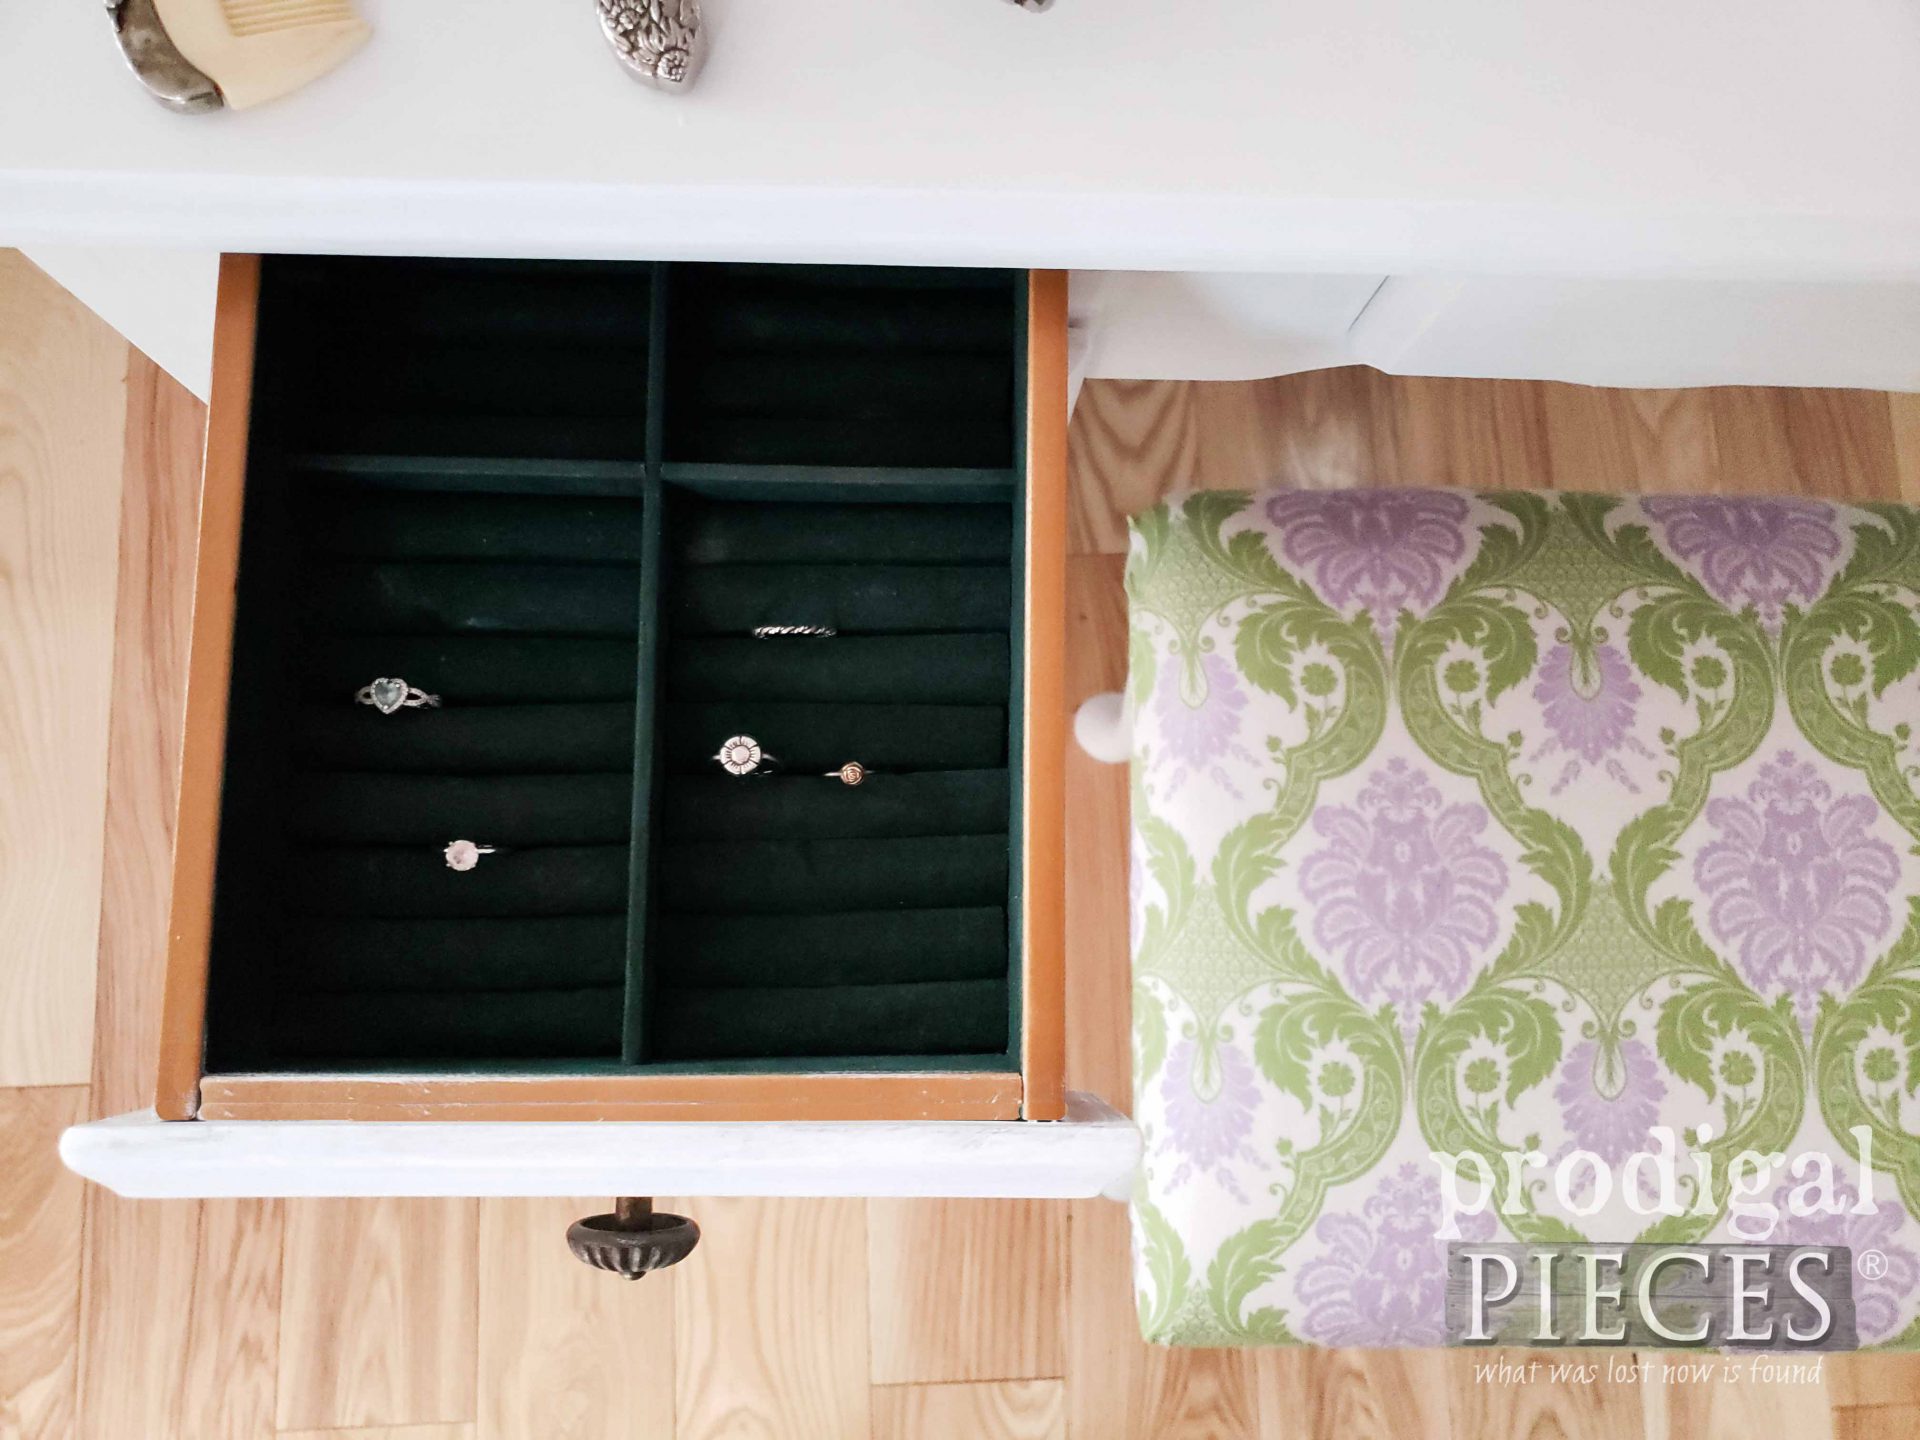 Ring Storage Drawer Built In to Girls Vintage Vanity Table by Prodigal Pieces | prodigalpieces.com #prodigalpieces #diy #home #homedecor #furntiure